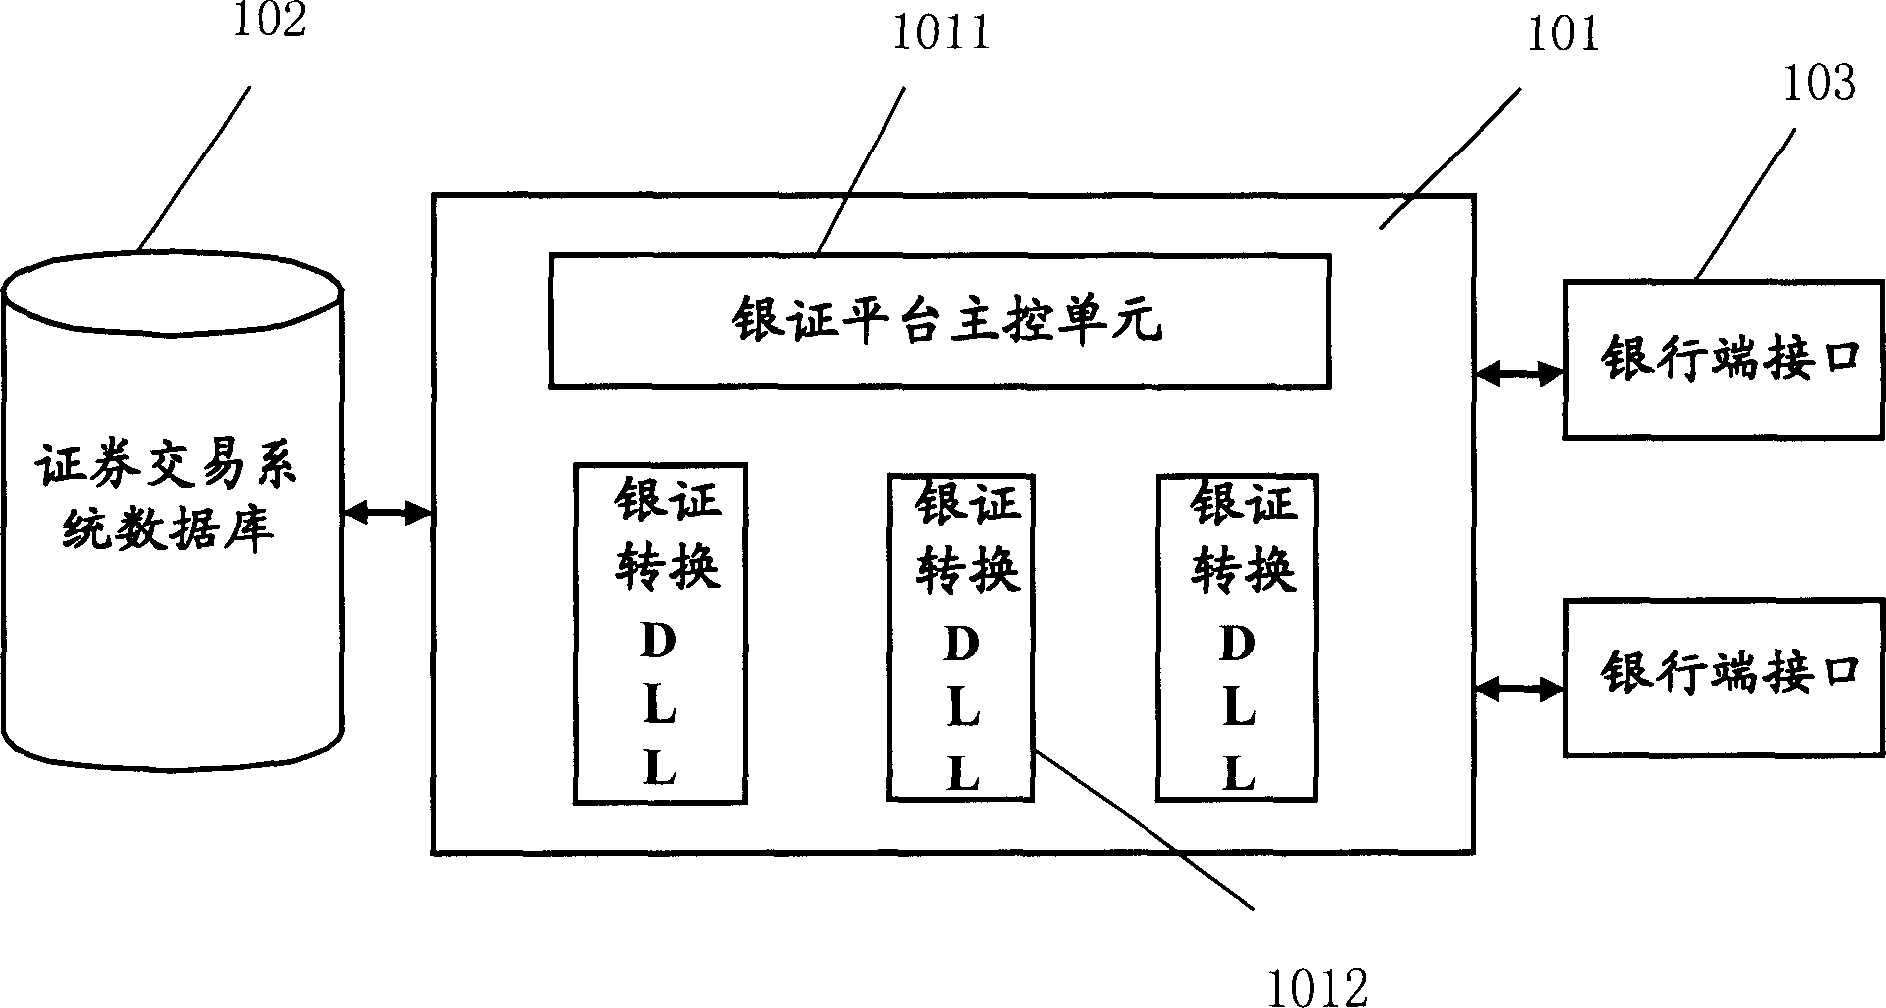 Data exchange device, system and method